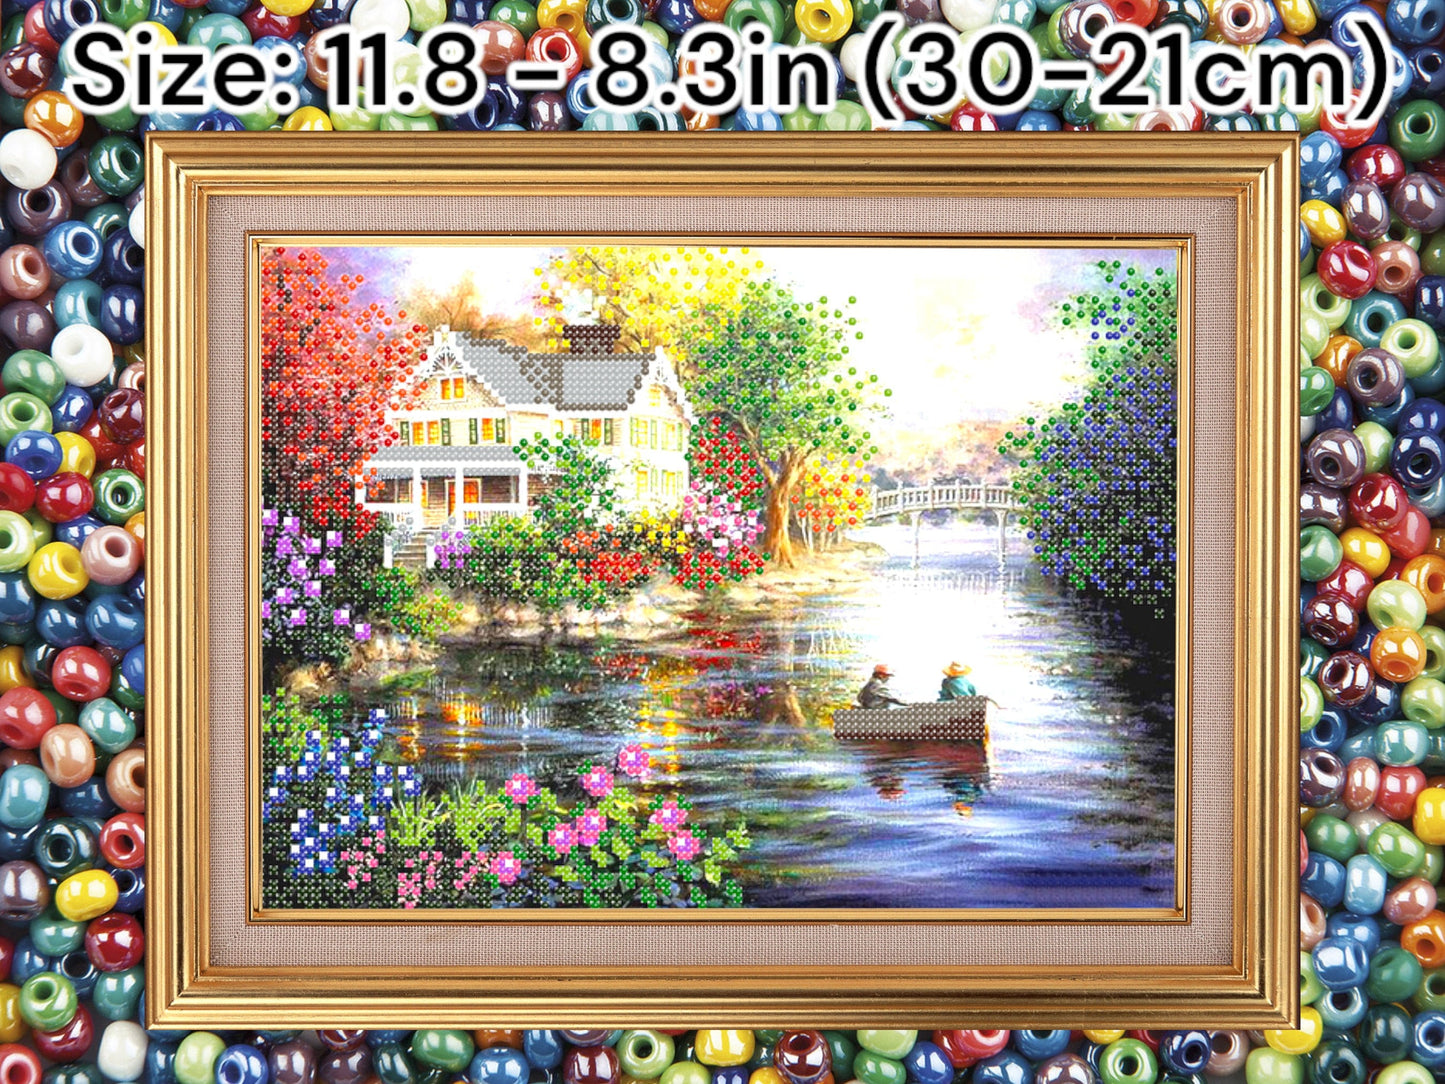 DIY Bead Embroidery Kit: 'On a Morning Fishing Trip' - Create your own stunning fishing-inspired artwork! Size: 11.8 - 8.3in (30-21cm) - VadymShop